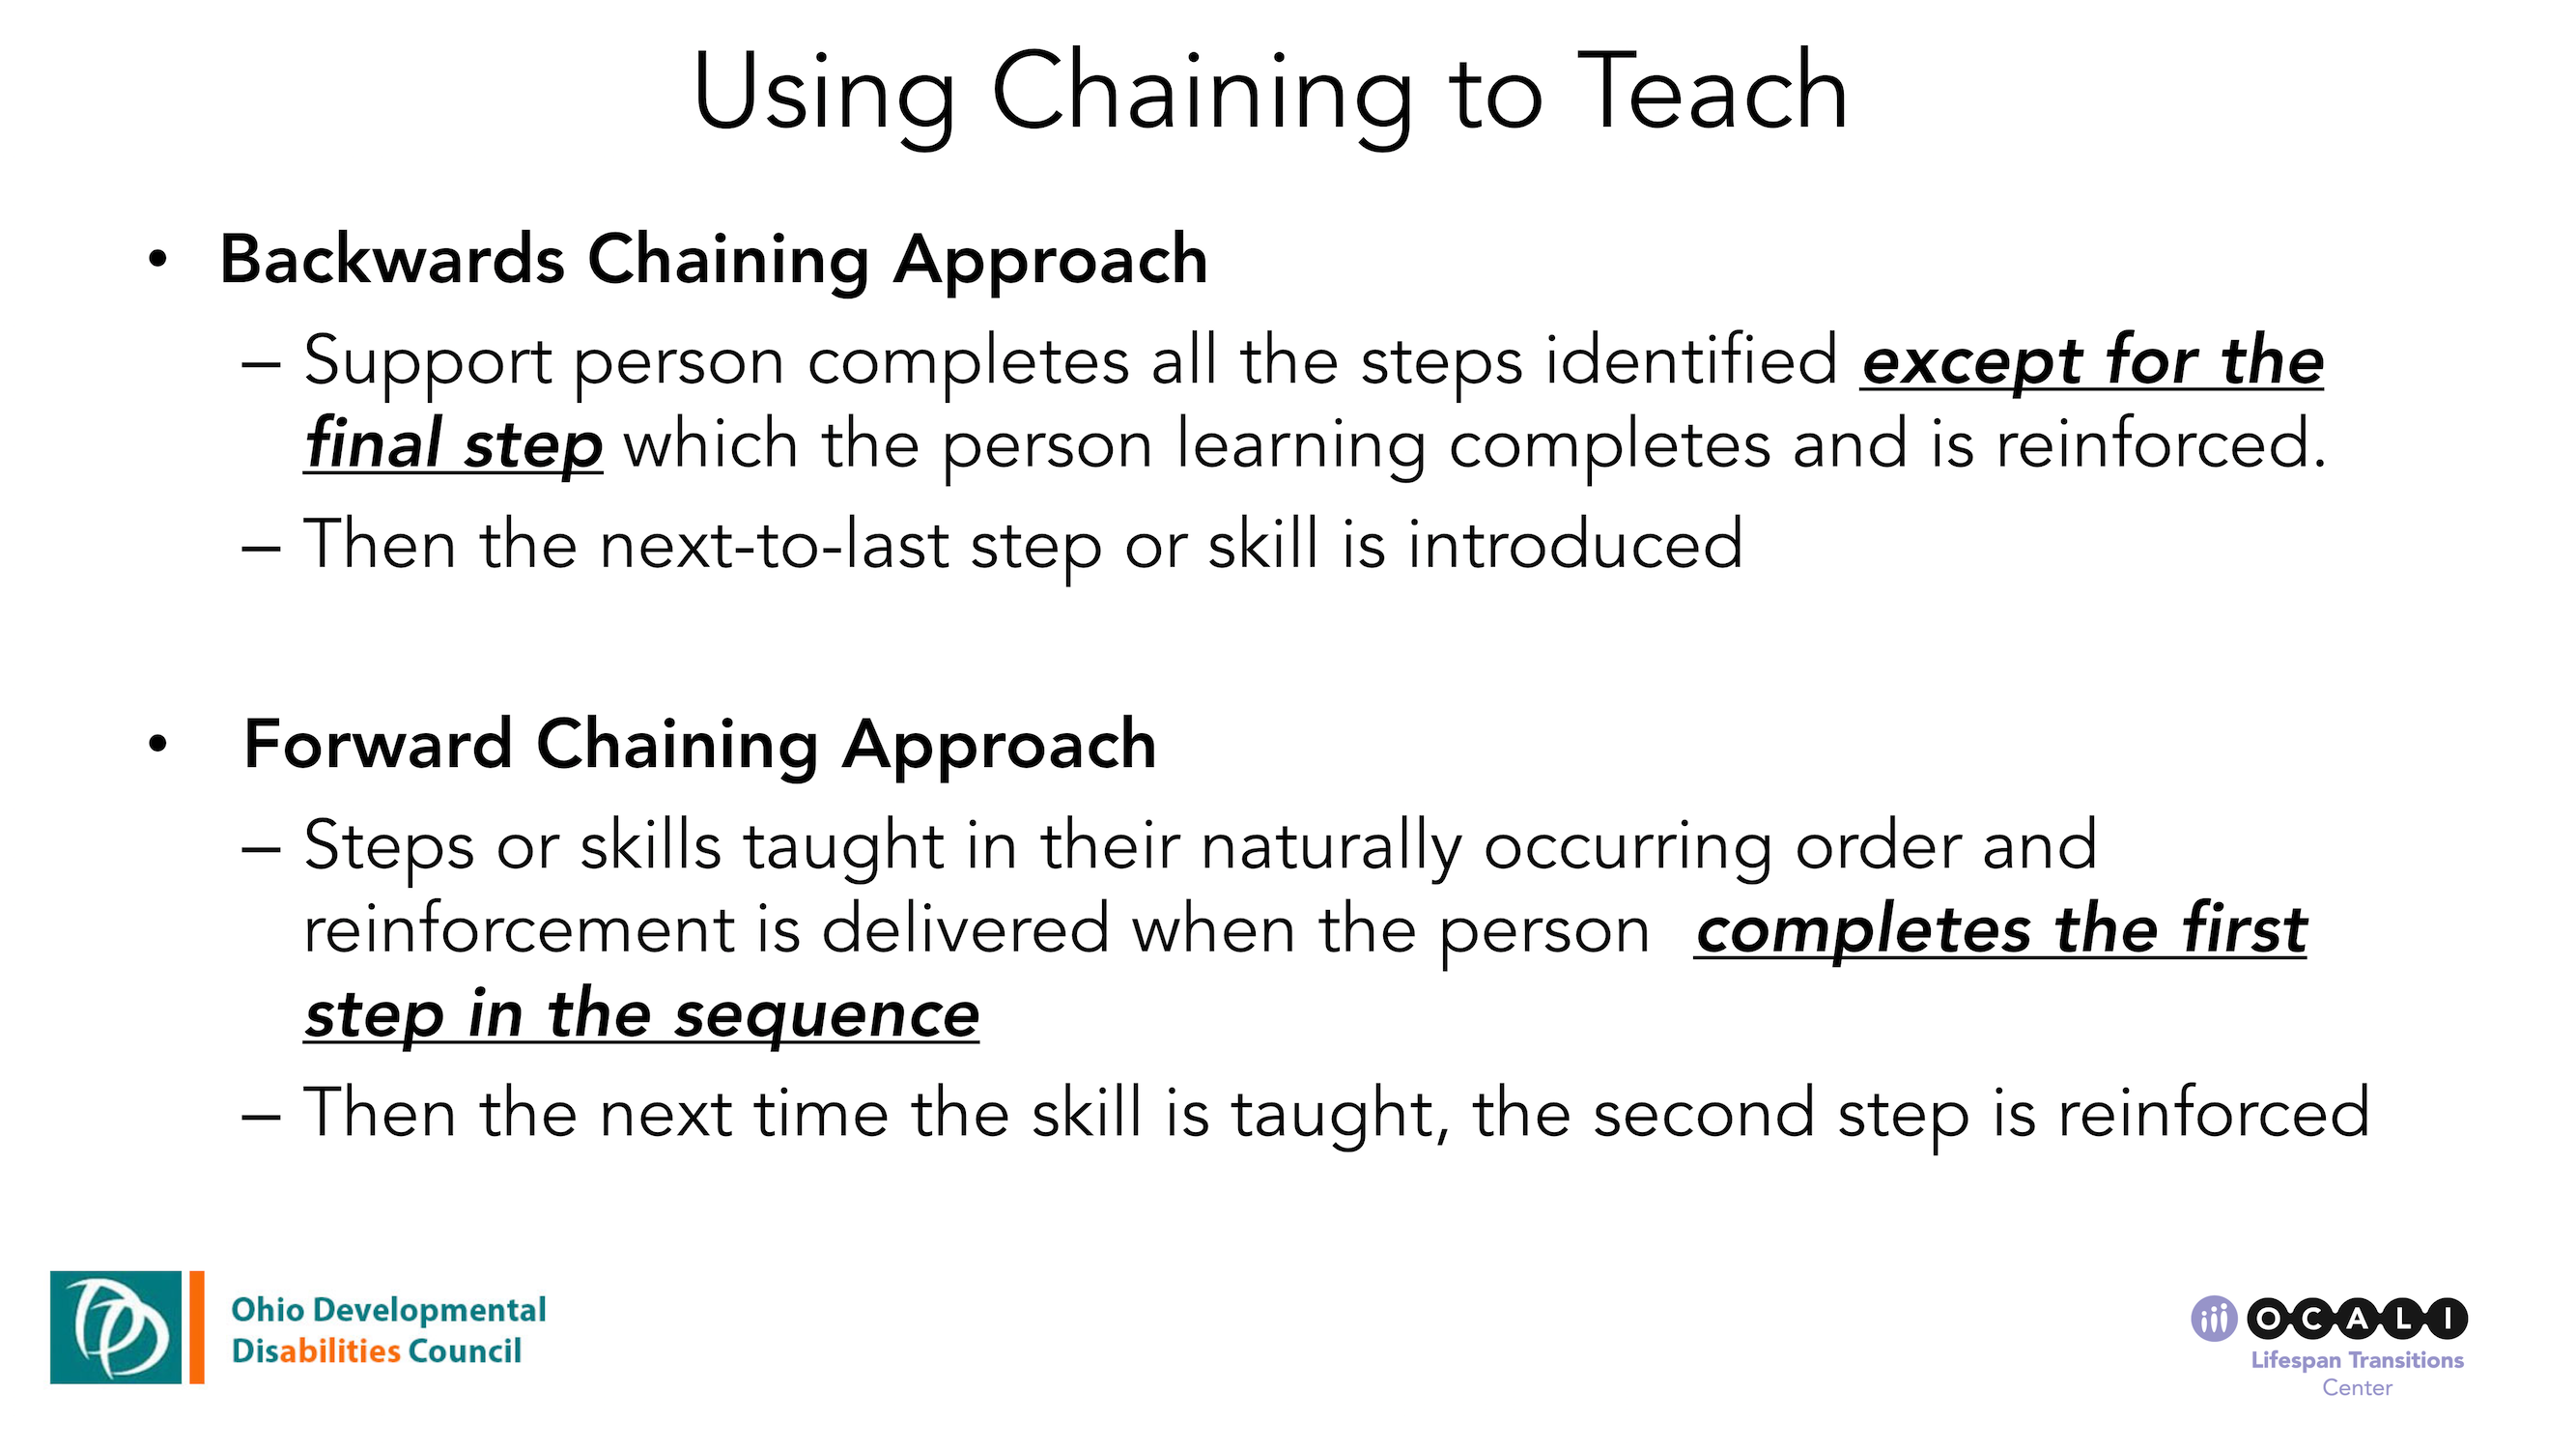 S3 Slide Four Preview: Using Chaining to Teach